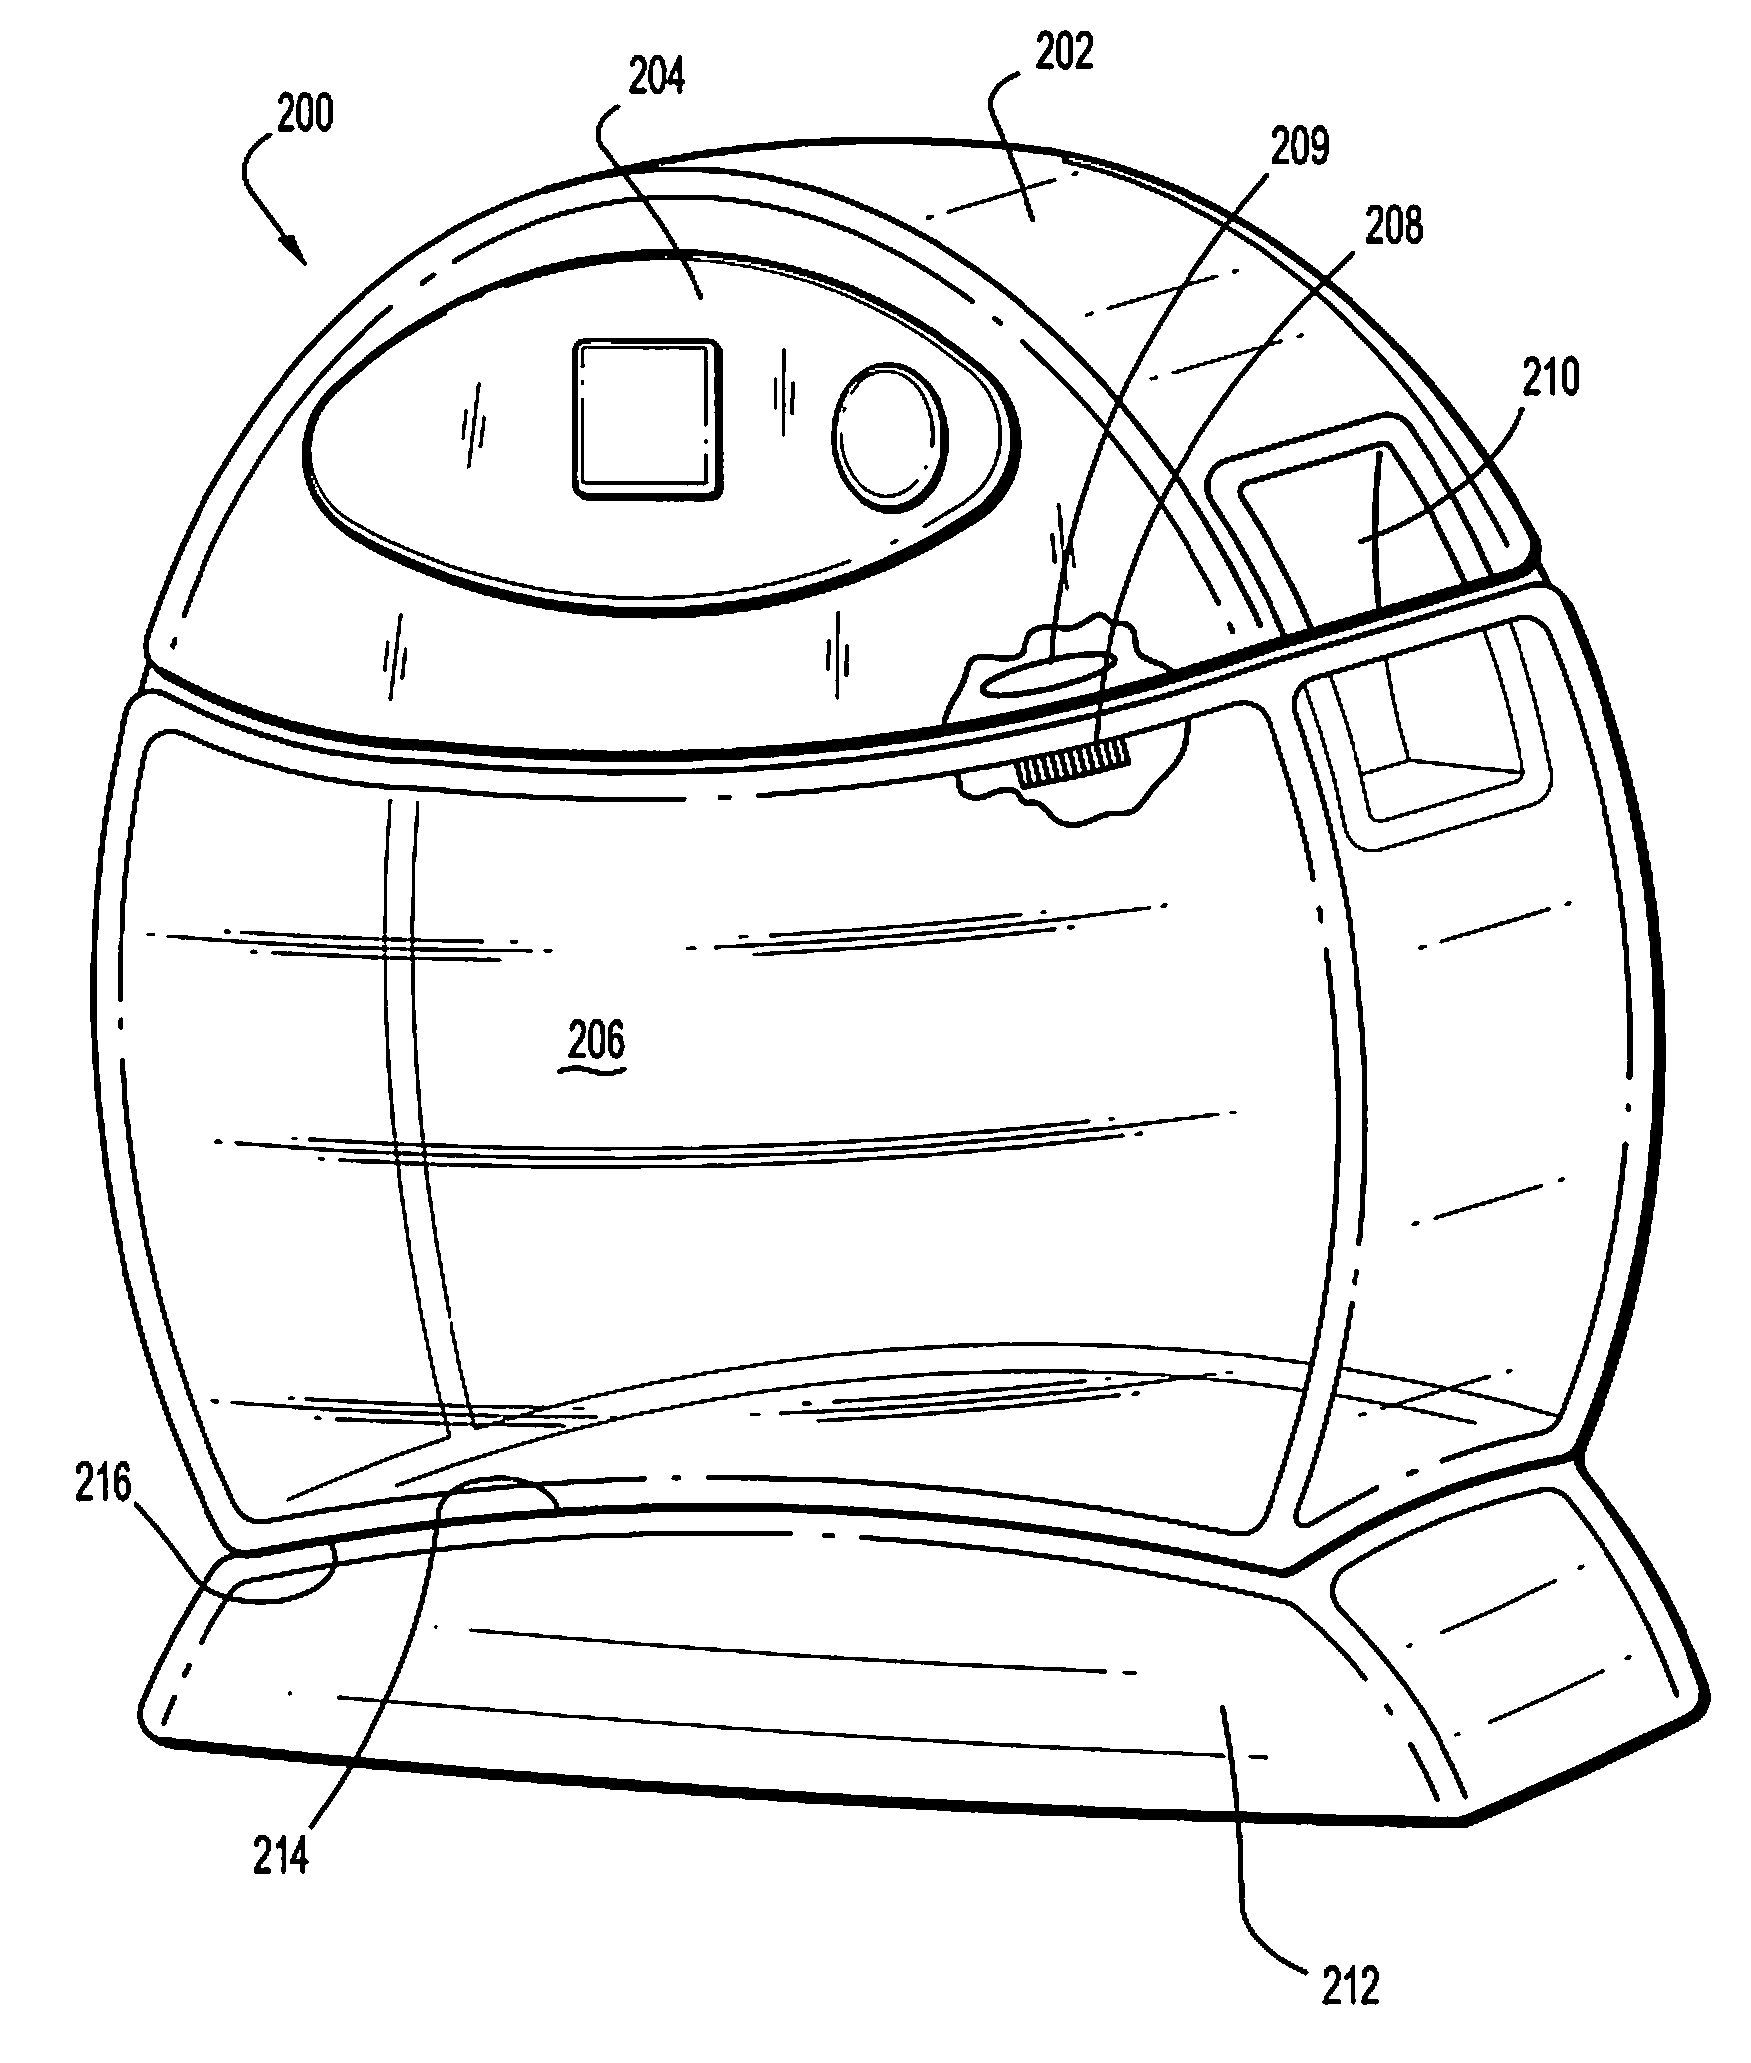 Wound therapy system with housing and canister support